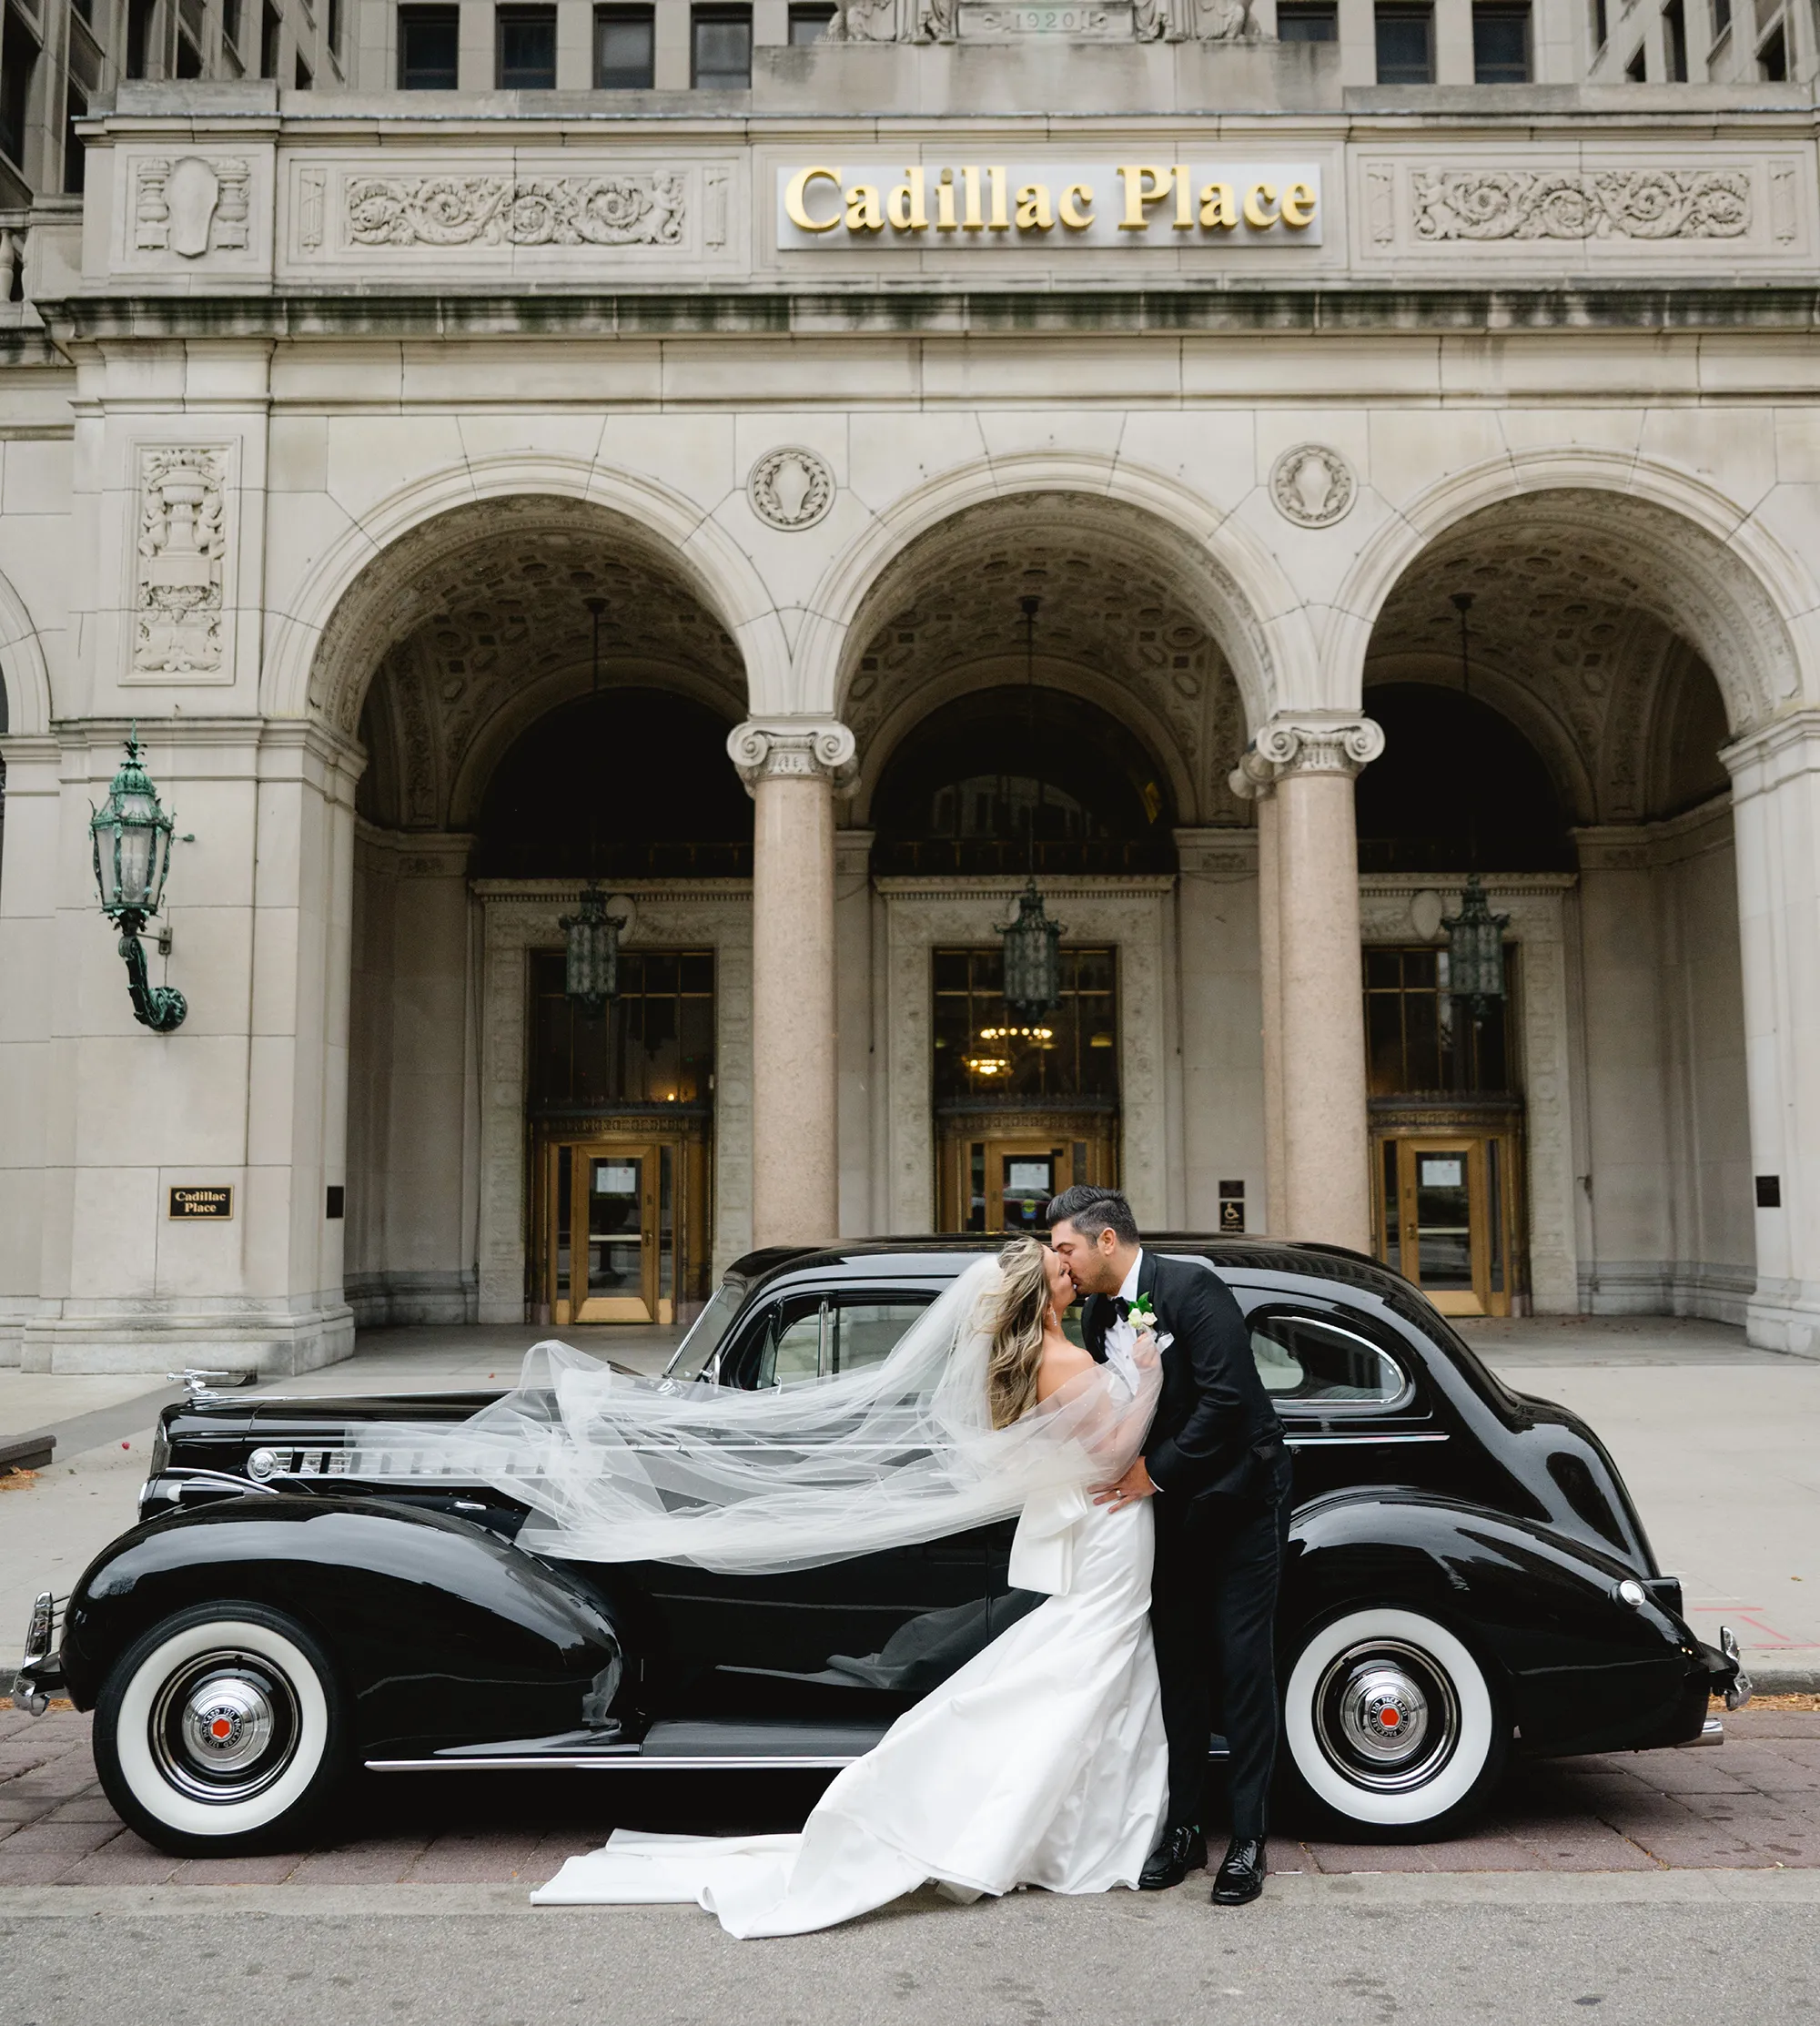 Jaclyn and Nick kissing in front of old car and Cadillac building